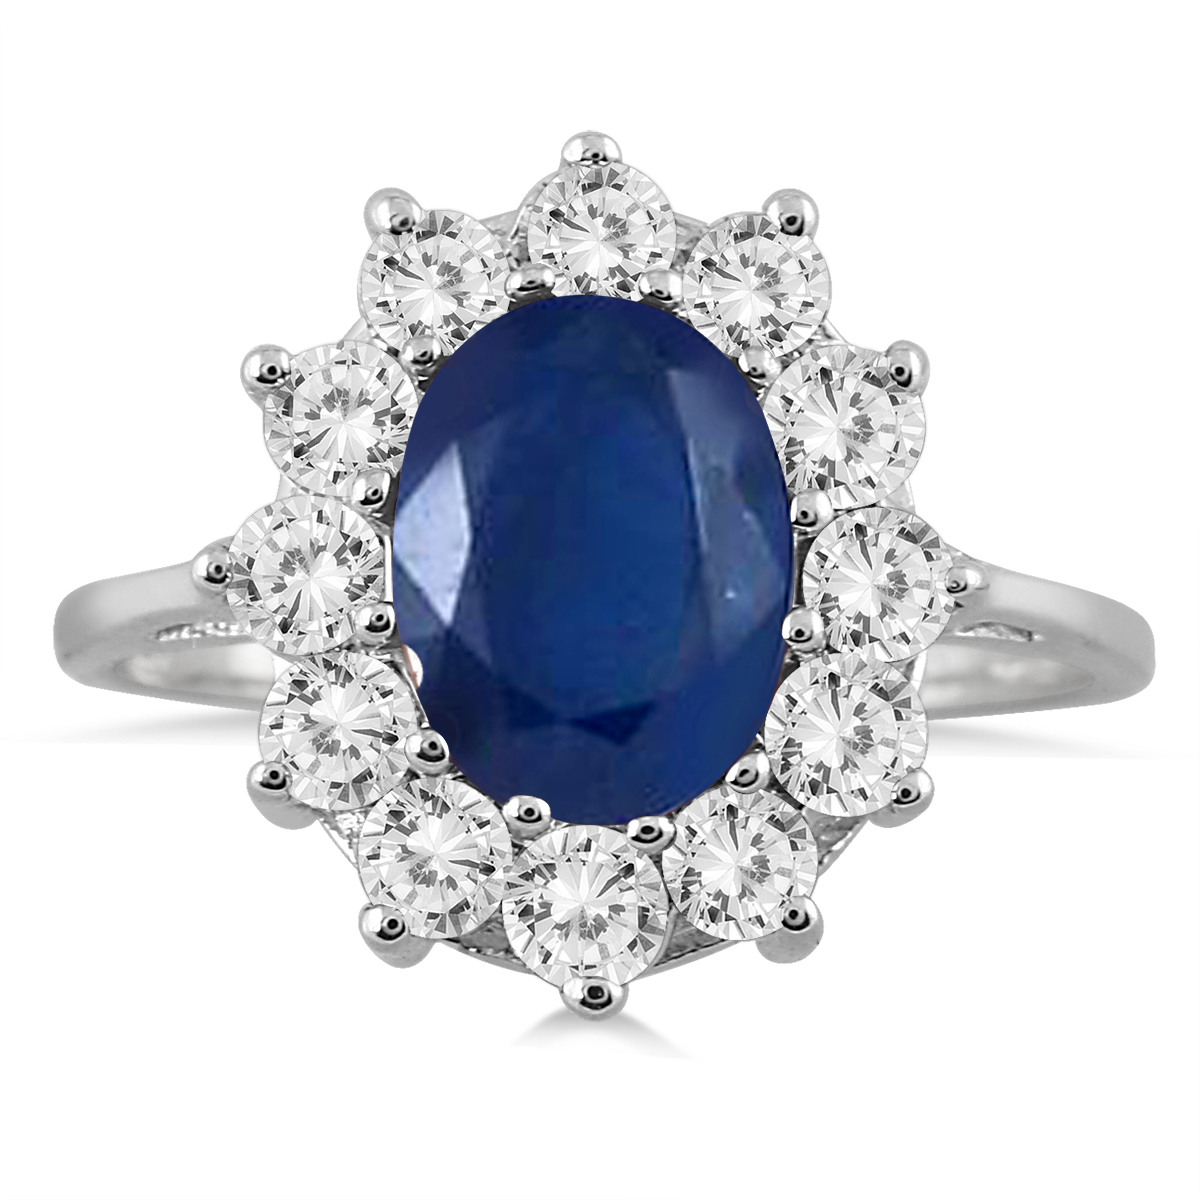 1 Carat Diamond and Sapphire Ring in 14K White Gold